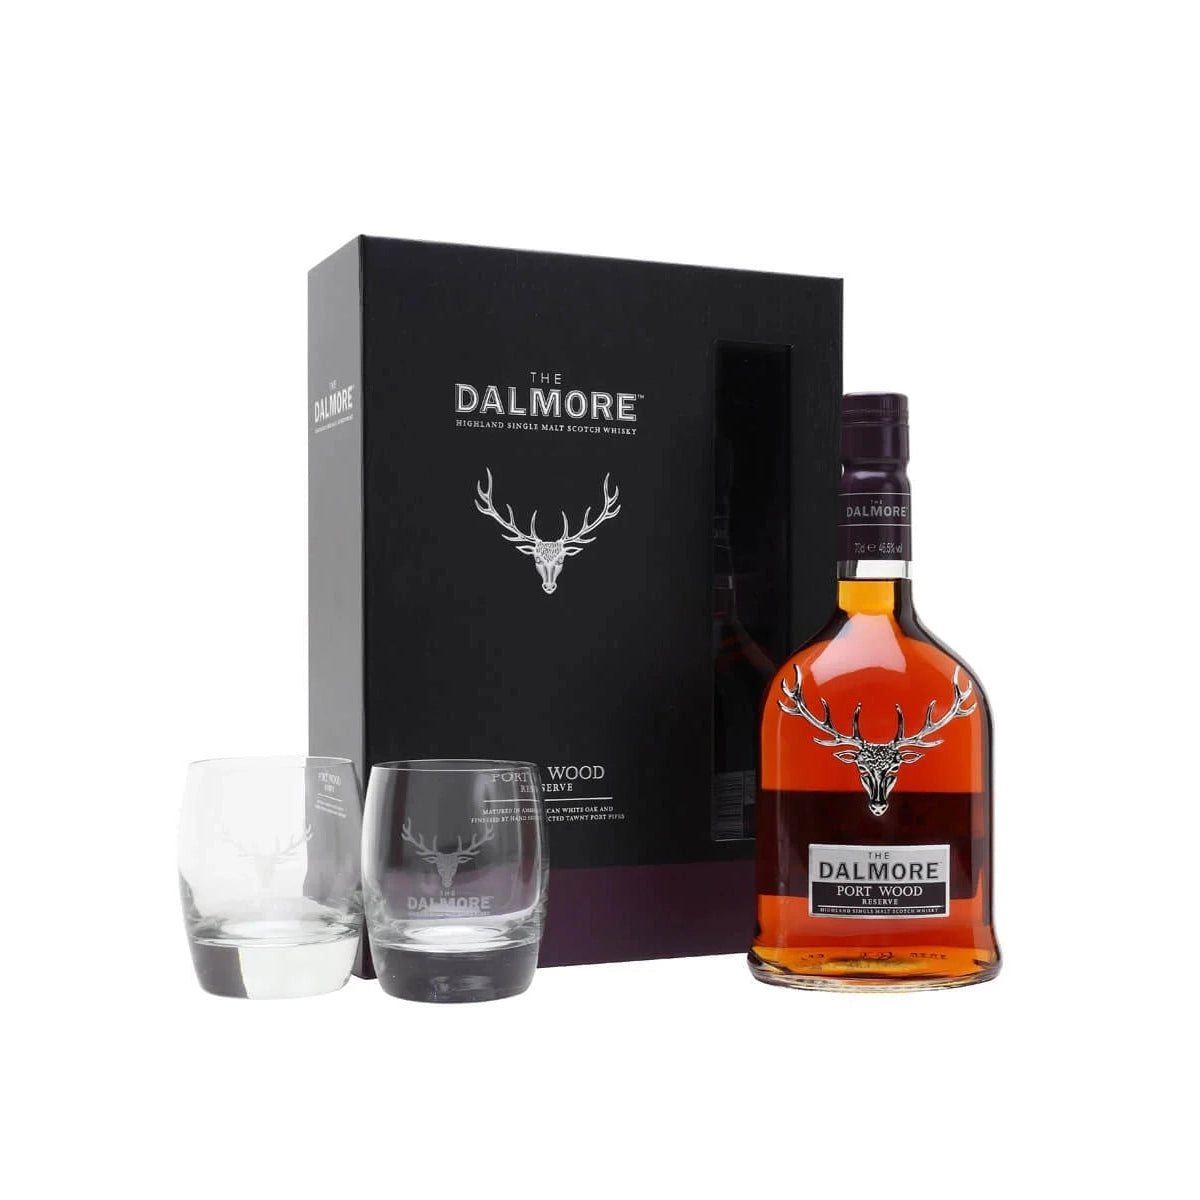 Dalmore Port Wood Reserve + 2 Glasses Gift Pack - Single Malt Scotch Whisky-Single Malt Scotch Whisky-5013967015098-Fountainhall Wines